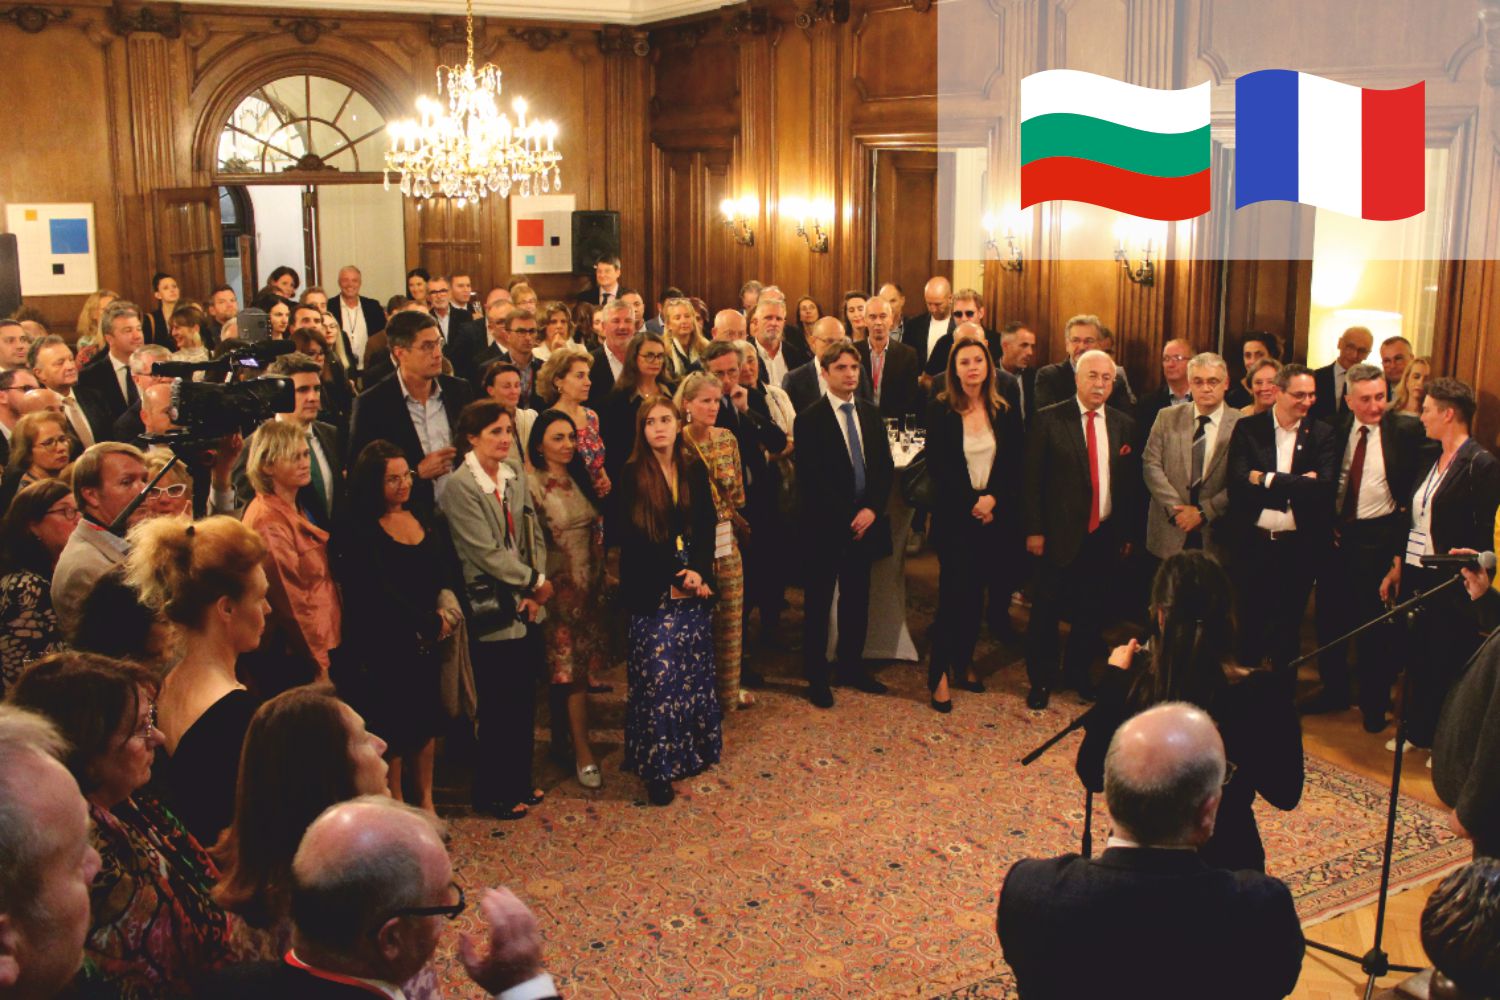 HIGH POTENTIAL FOR FRENCH-BULGARIAN BUSINESS PARTNERSHIPS WAS REPORTED AT A FORUM IN SOFIA